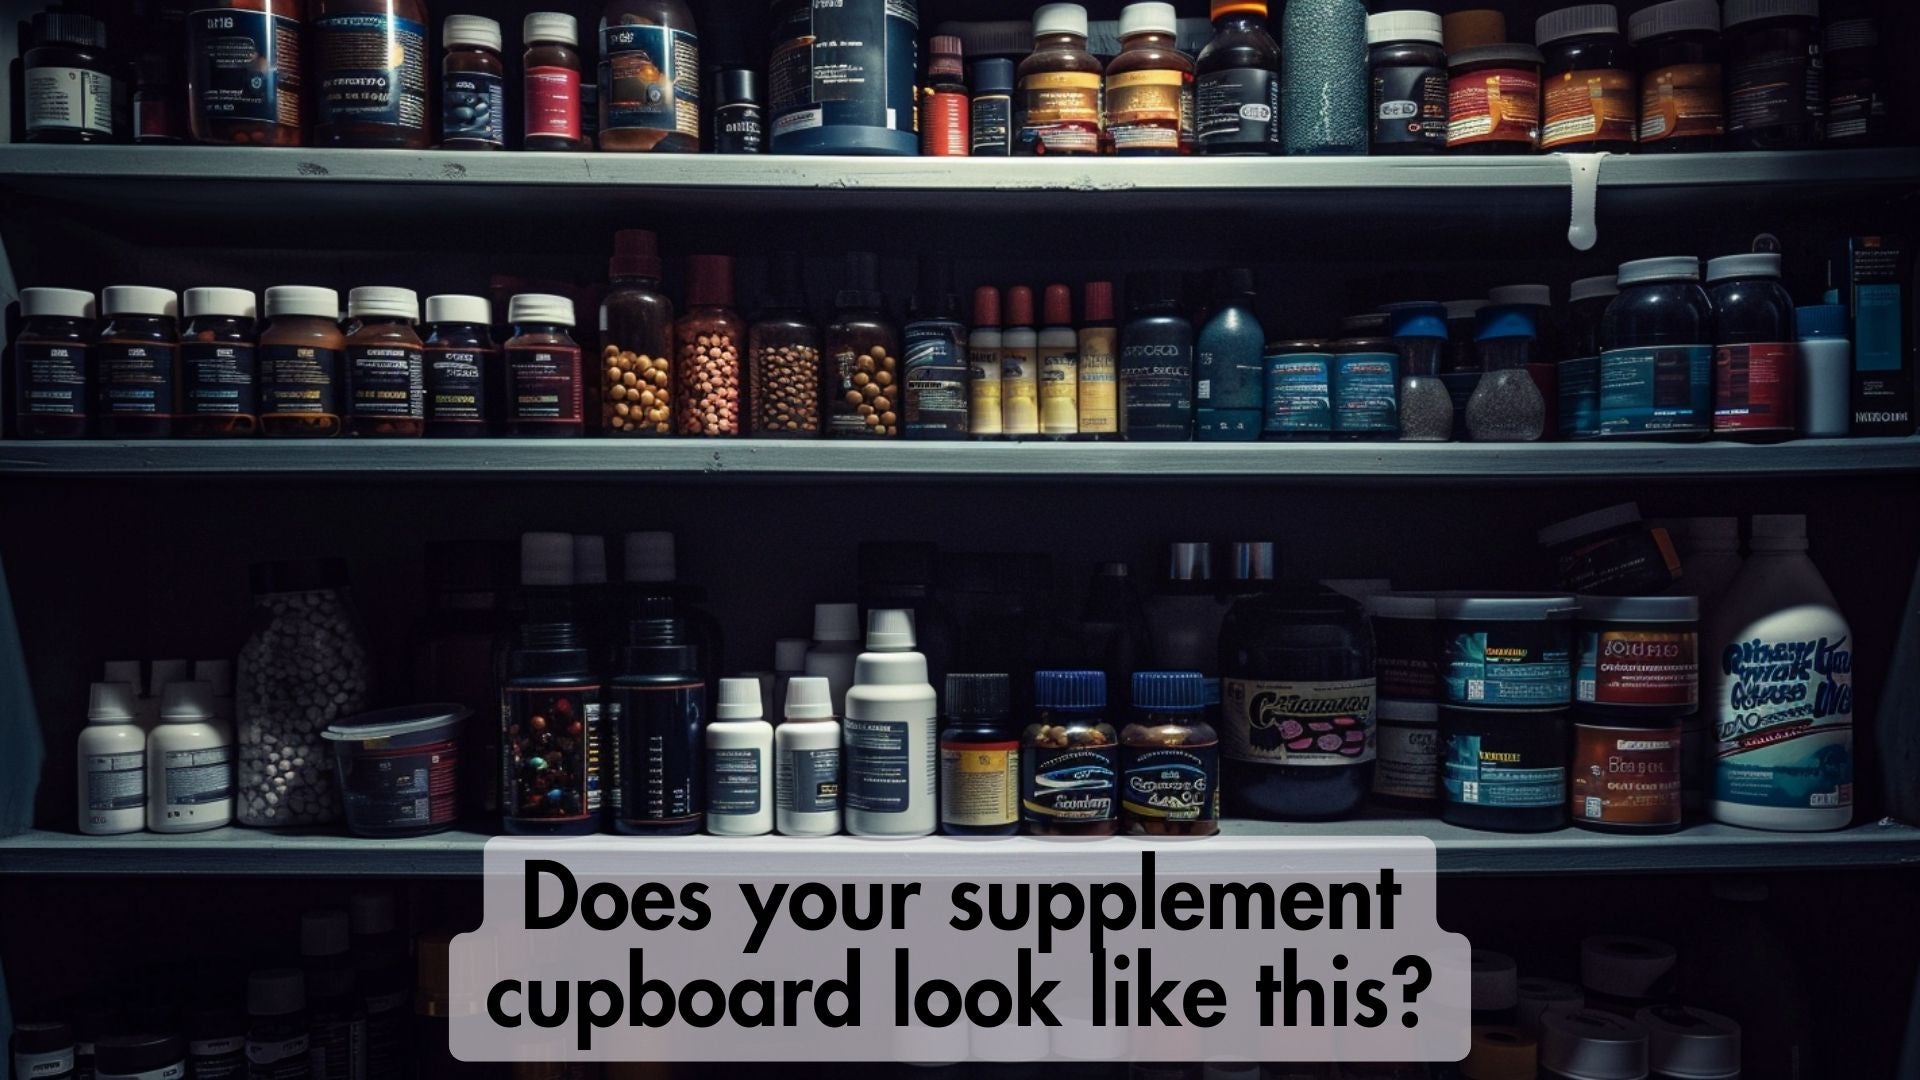 Addiction to supplements, meal replacements and health drinks